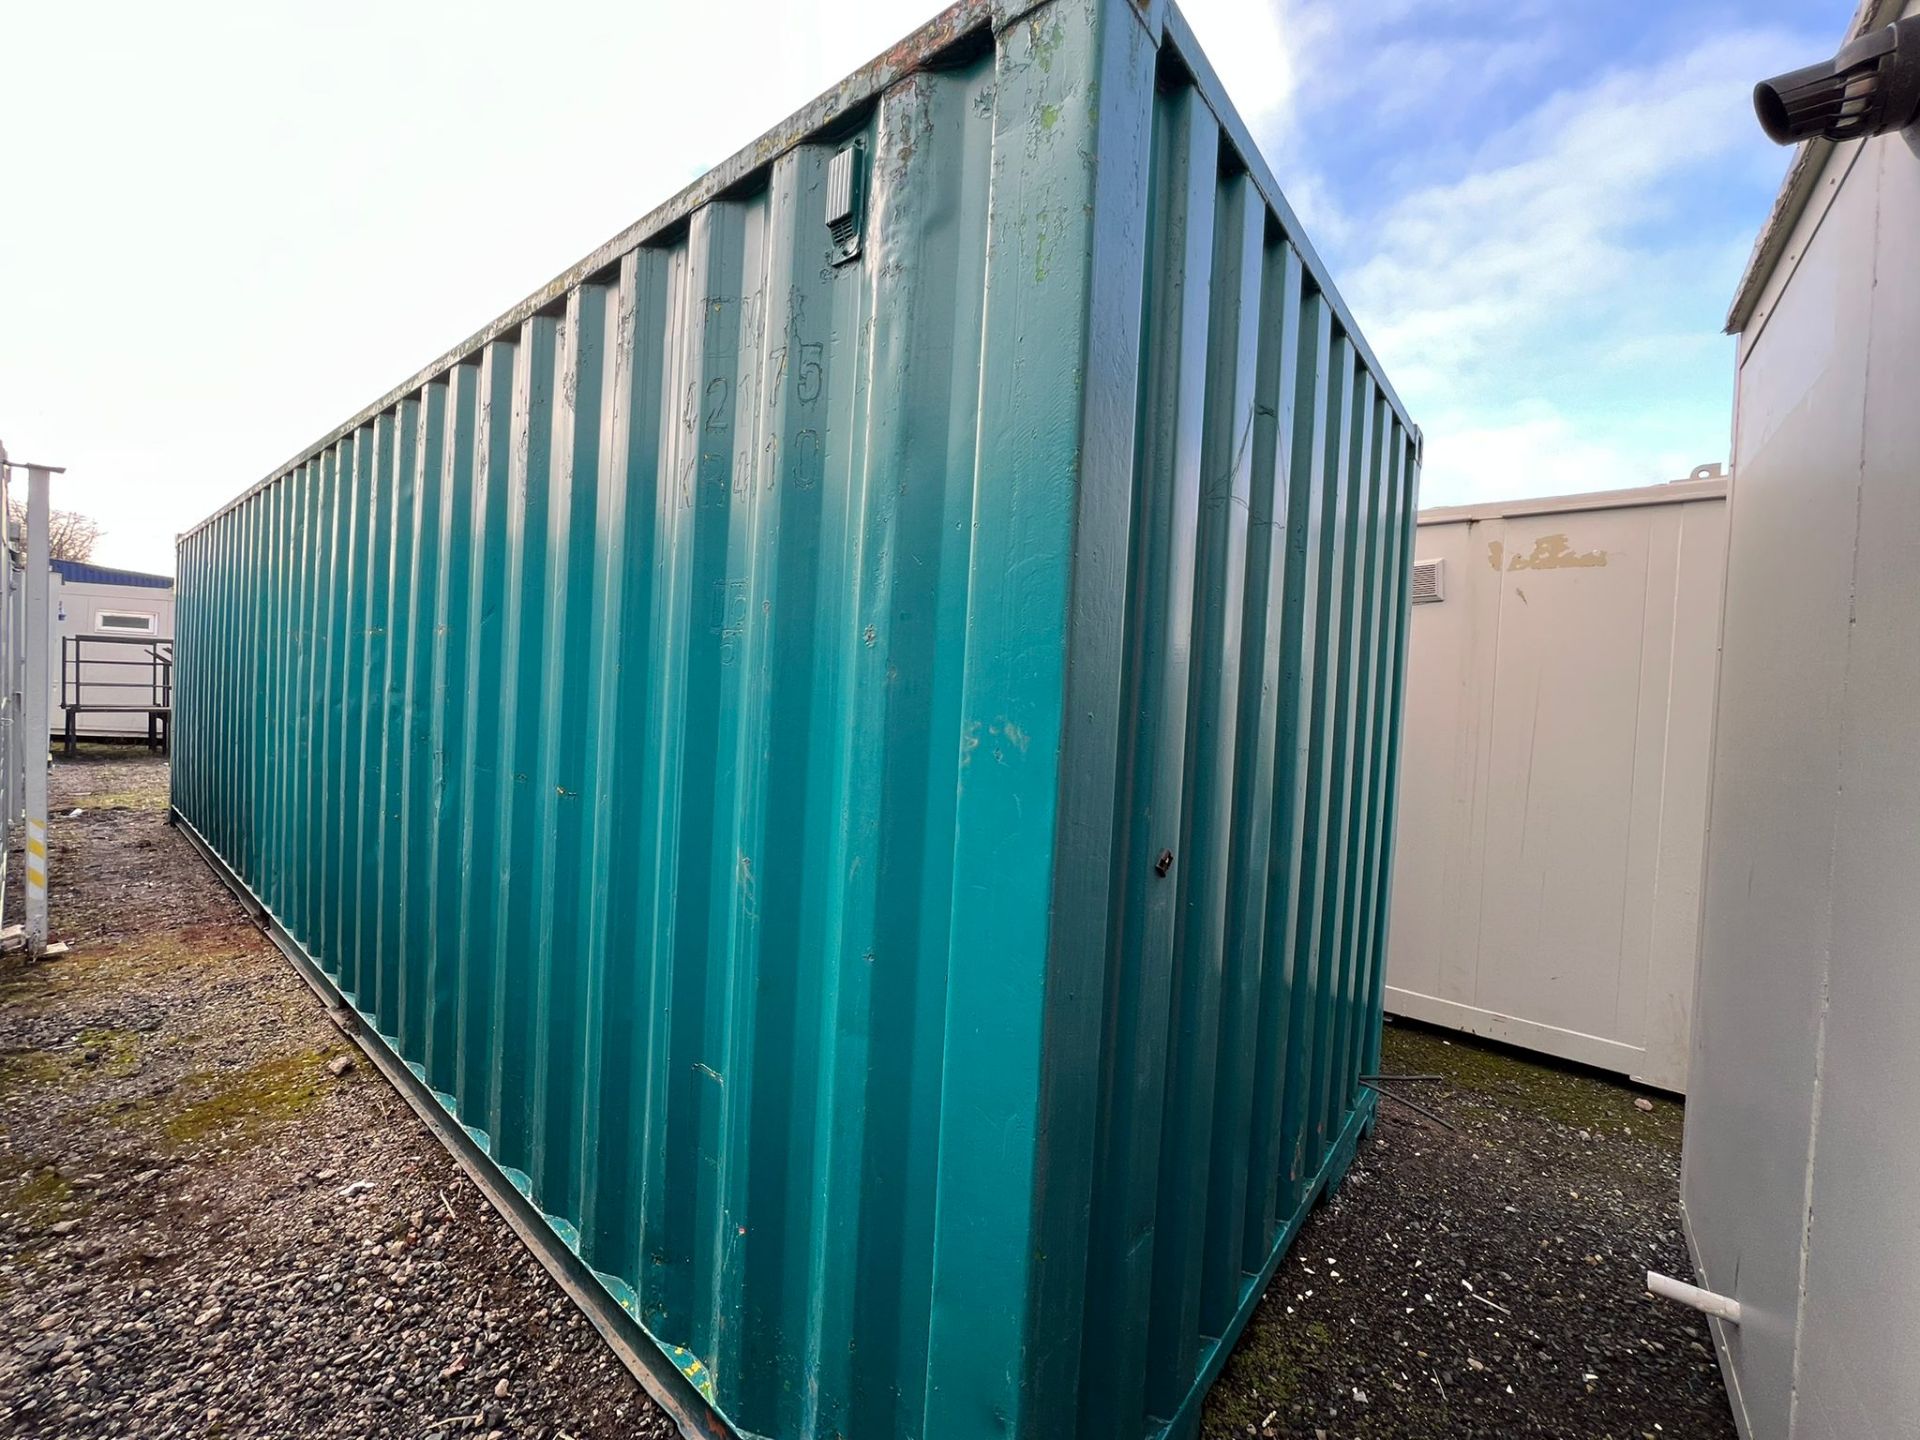 30ft x 8ft shipping container storage container - Image 2 of 7